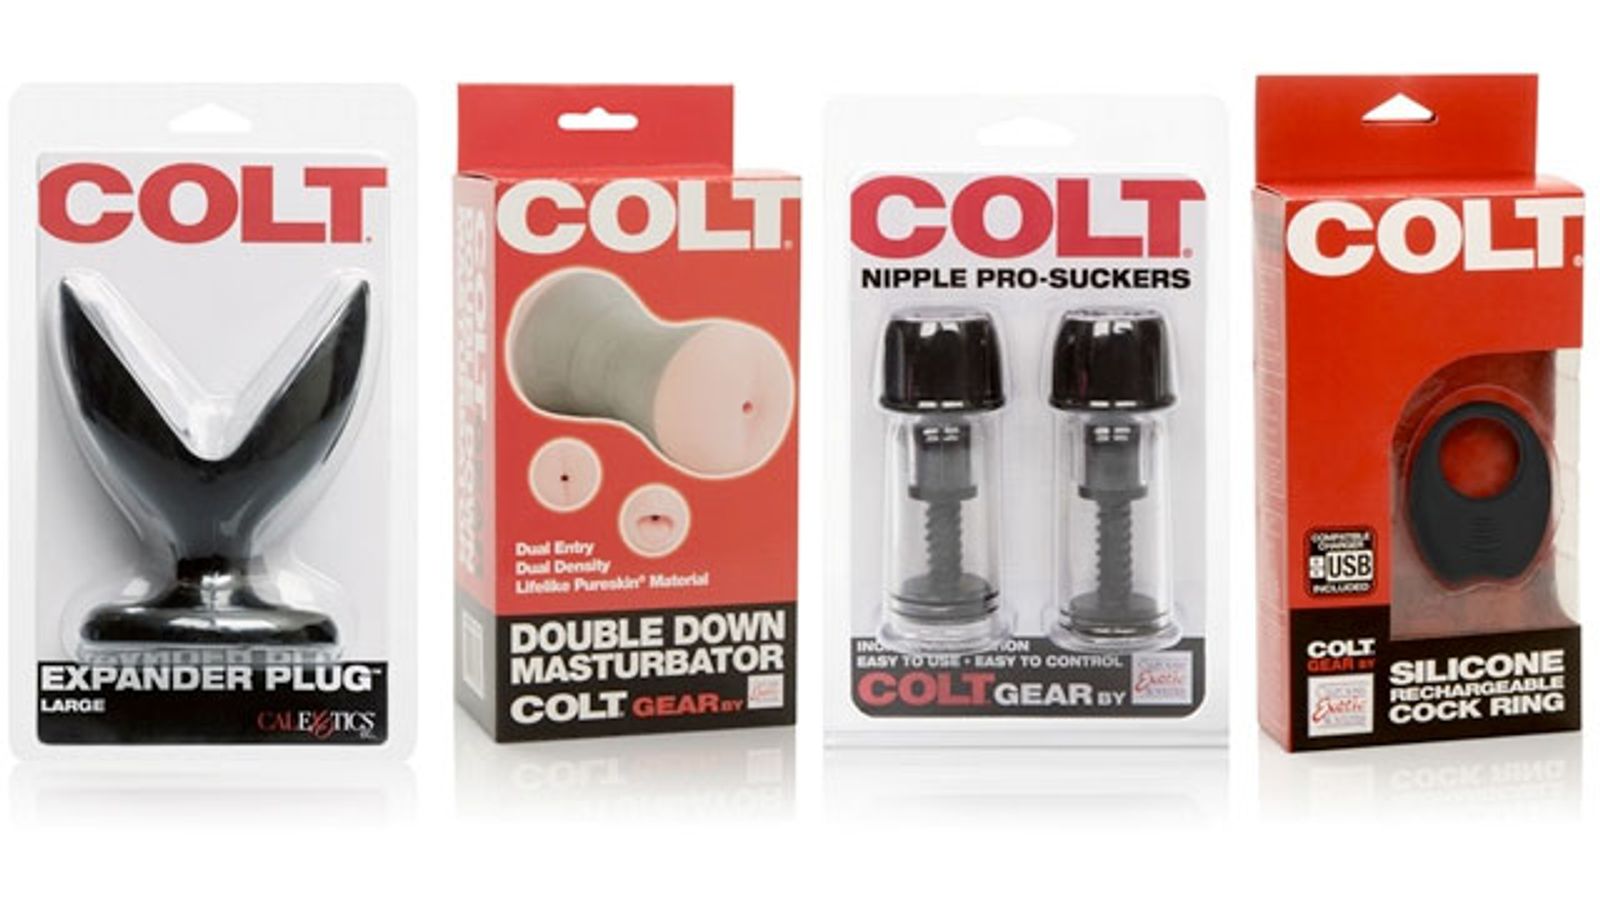 CalExotics and Colt Add More Toys to Colt Gear Line